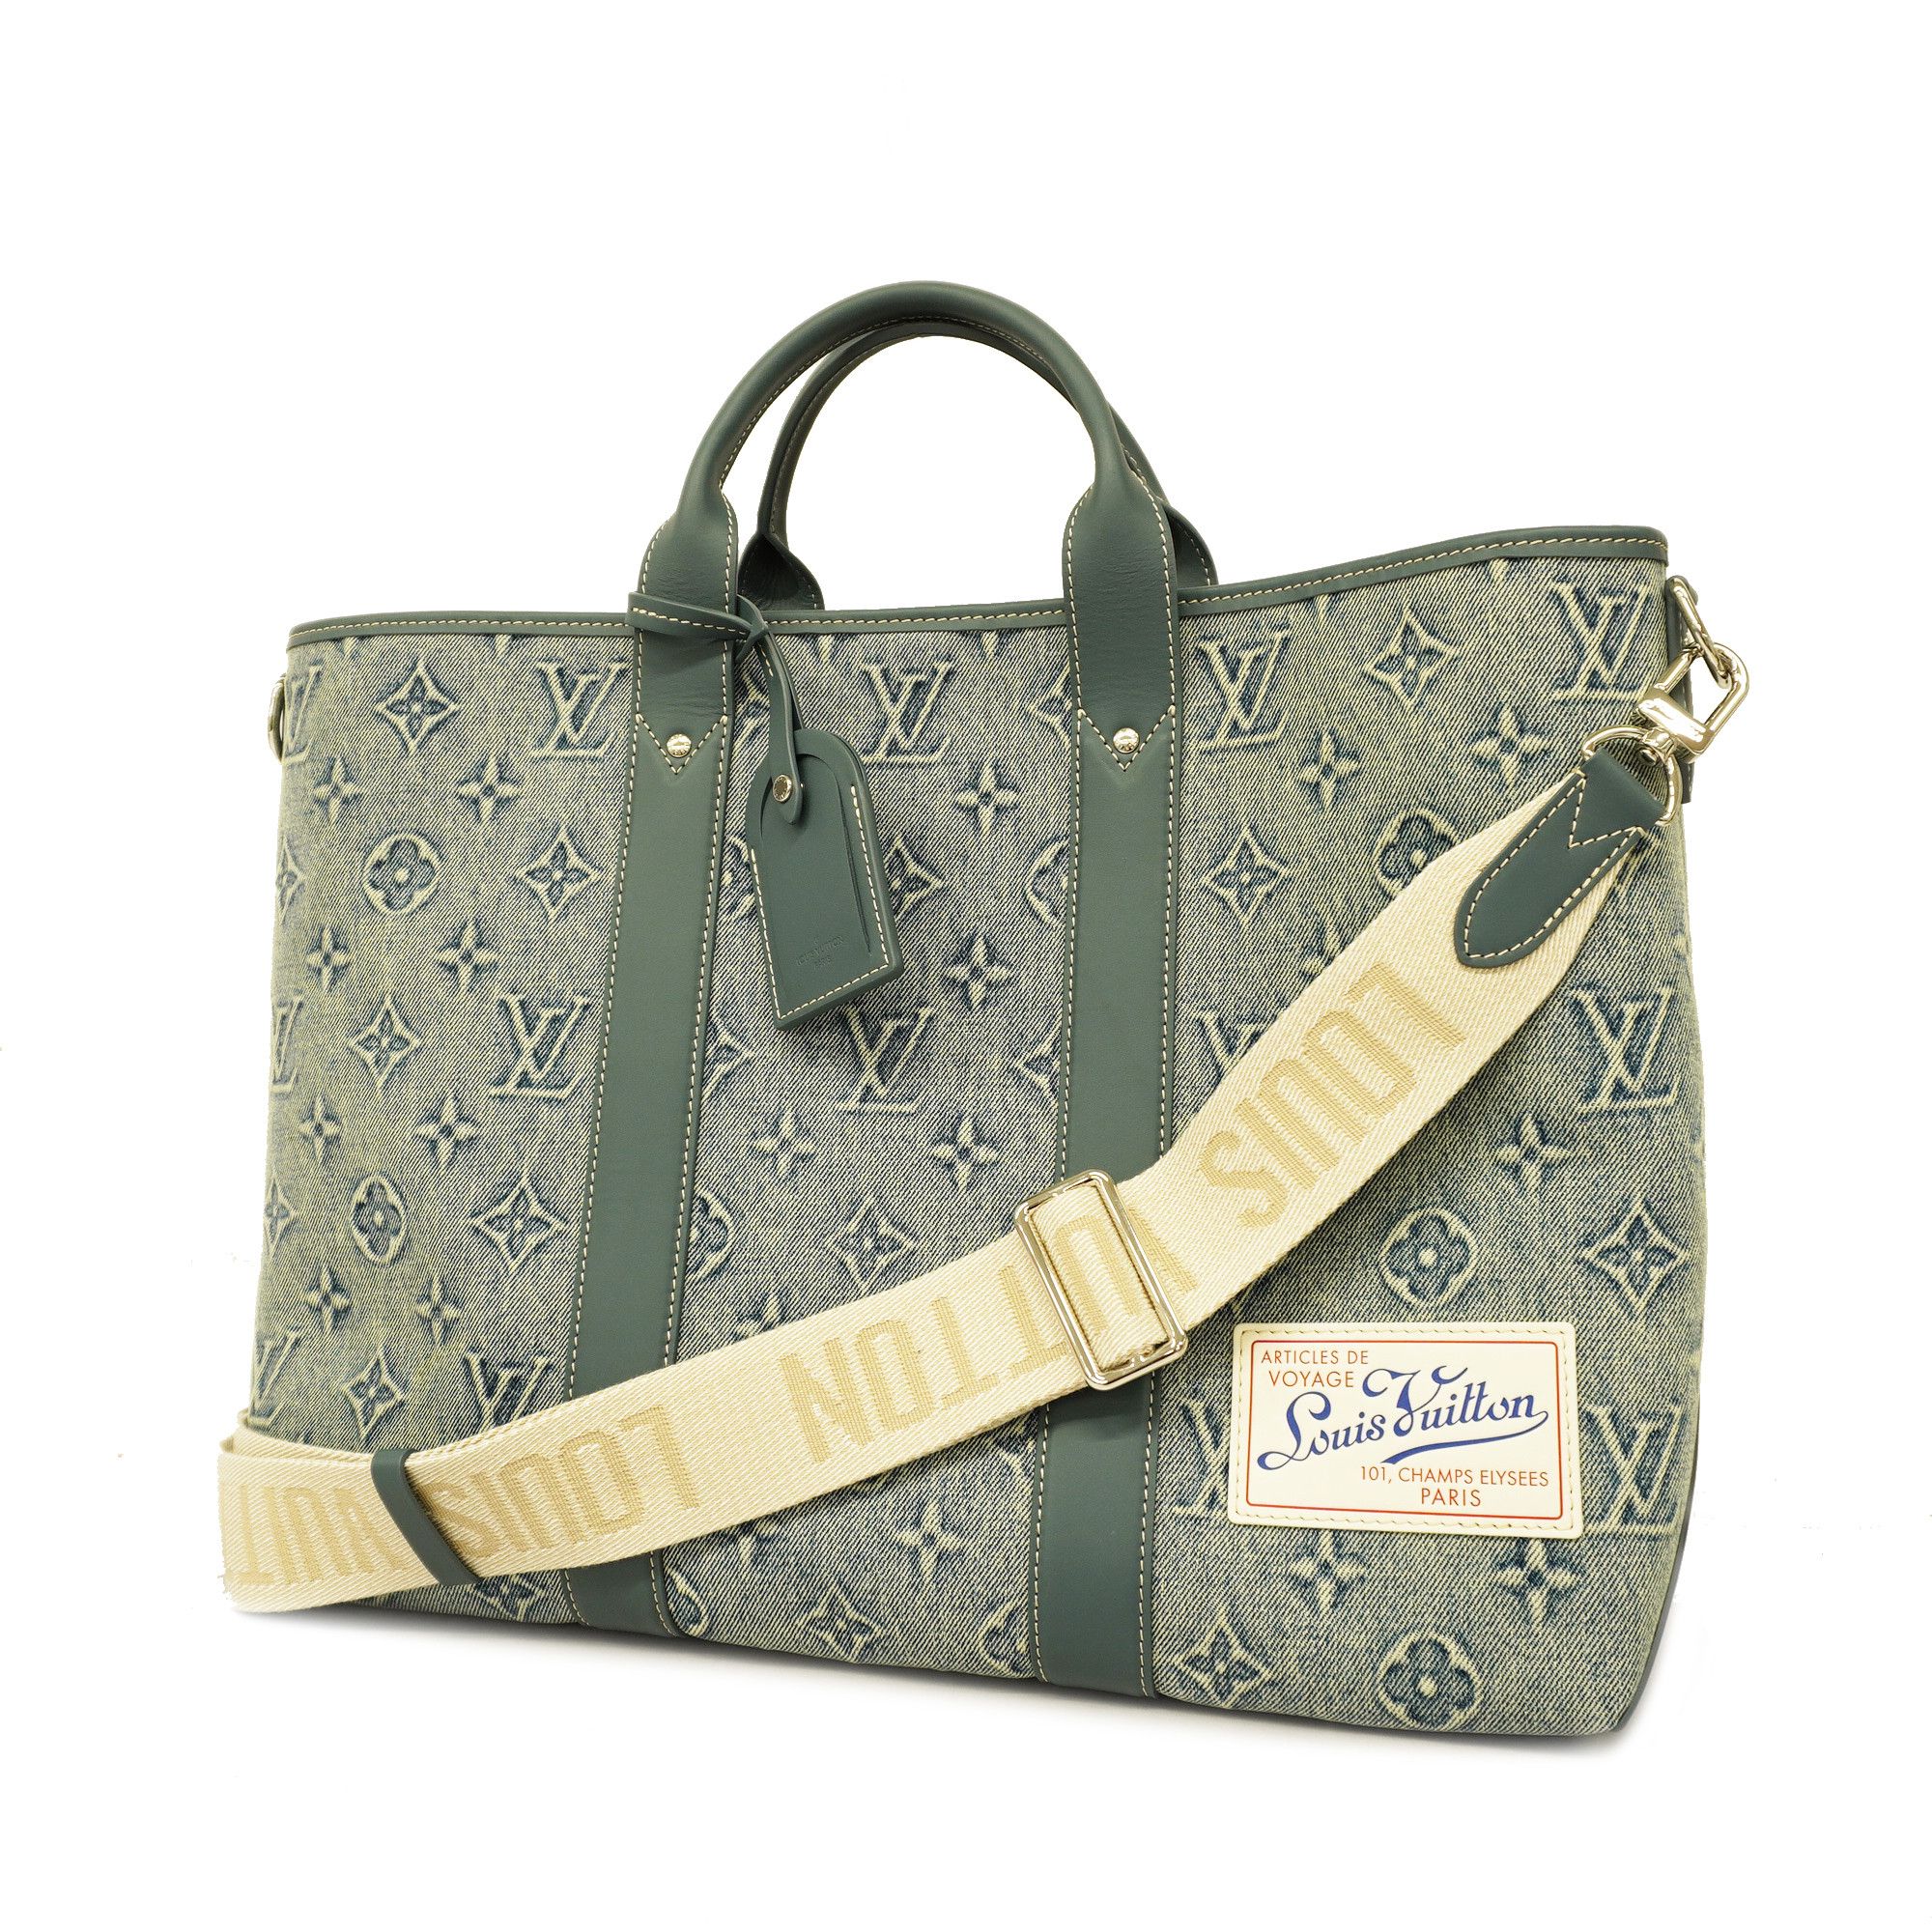 Weekend Tote NM Monogram Other Canvas - Bags M22537